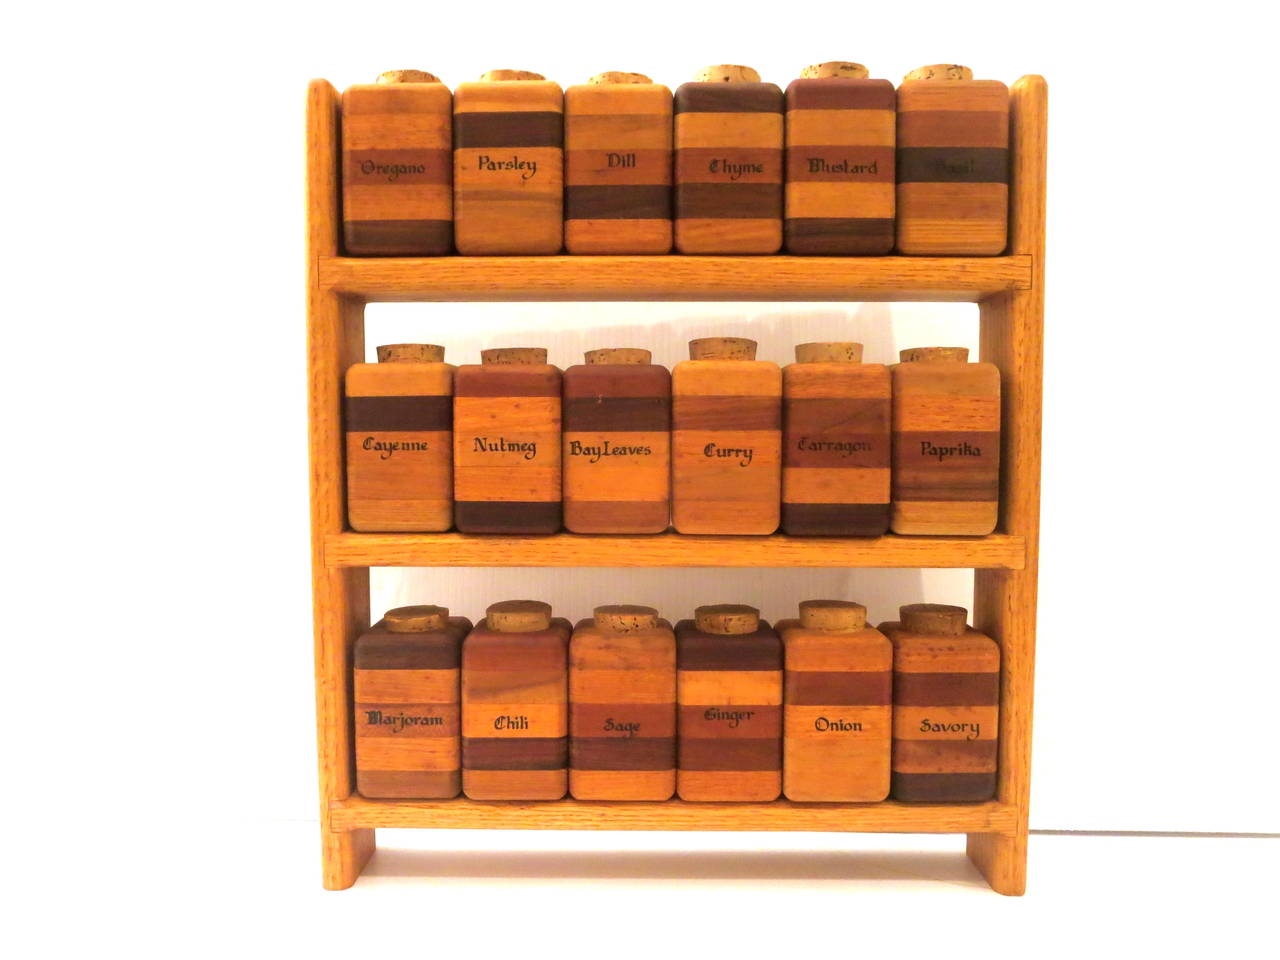 20th Century American Modern Multiwood Spice Rack with 18 Spice Container Capacity